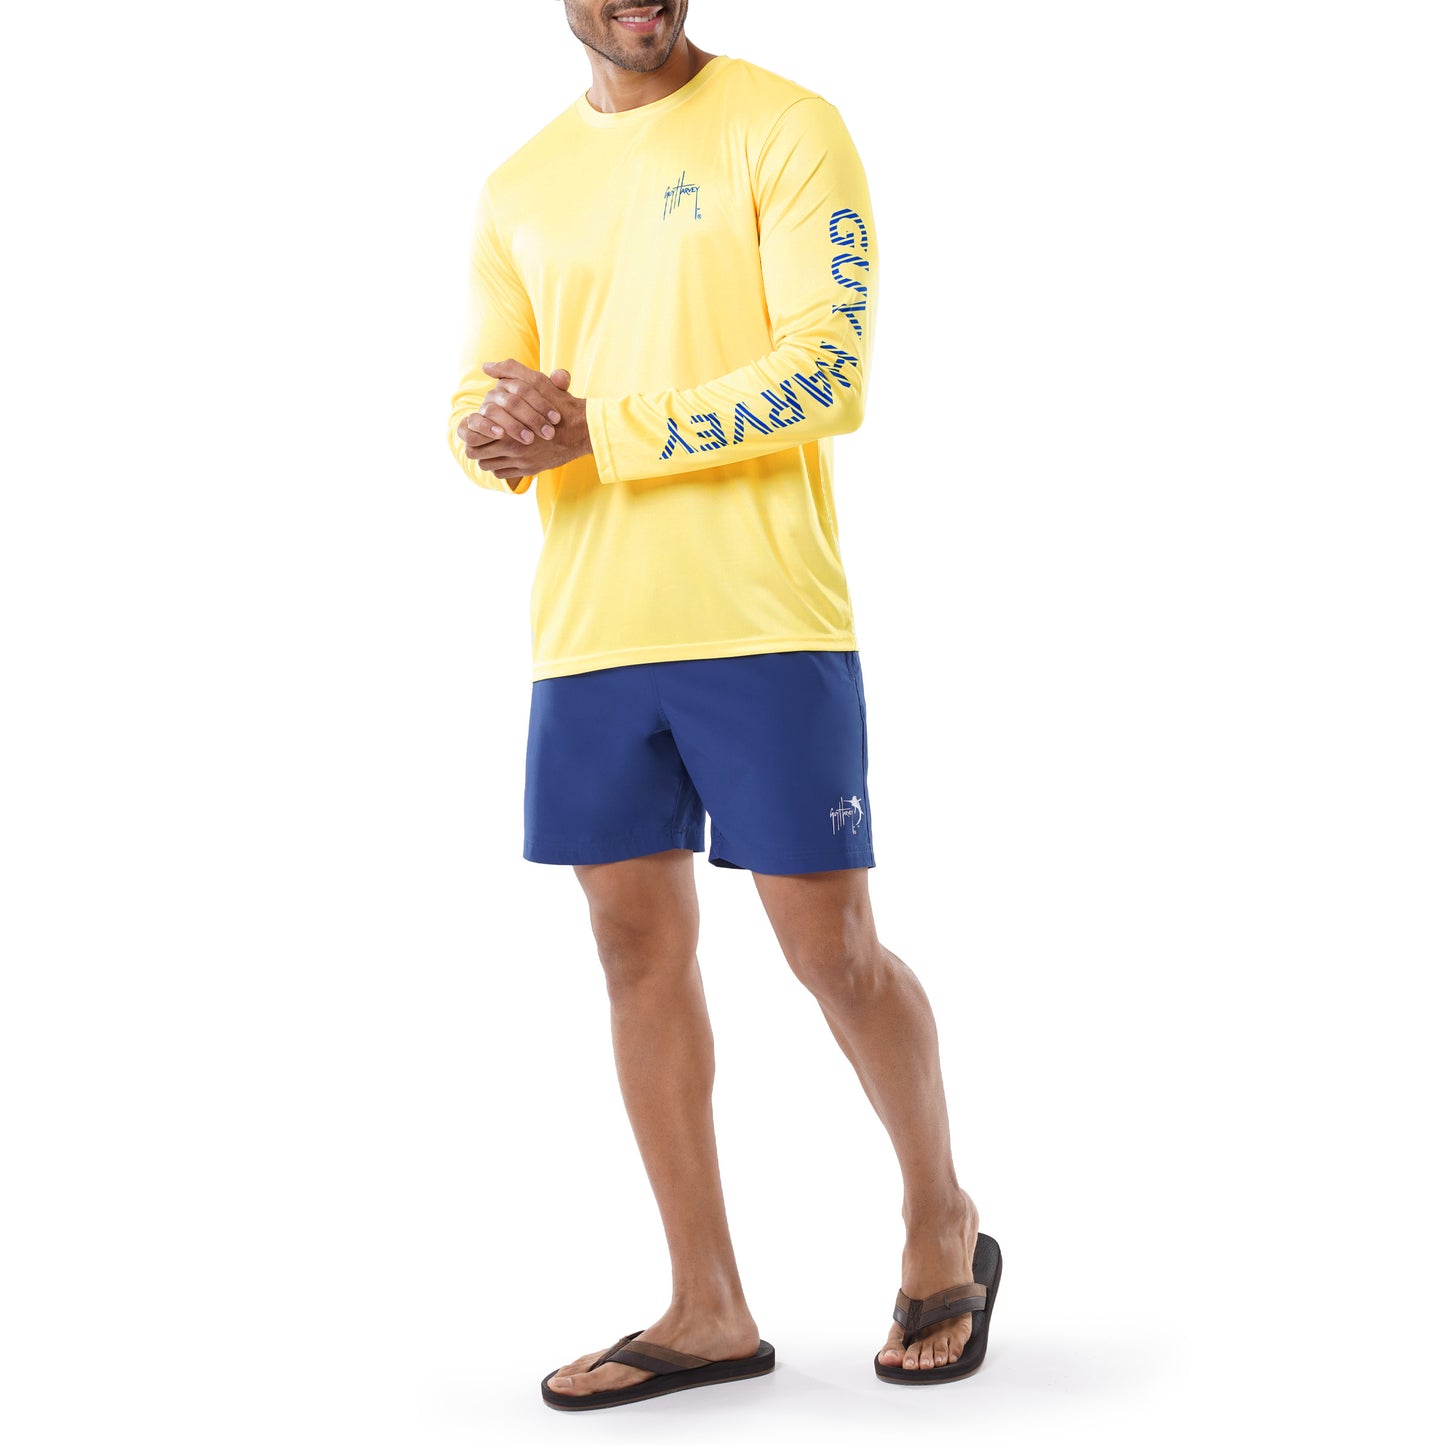 Men's The Art of Offshore Performance Sun Protection Top View 8